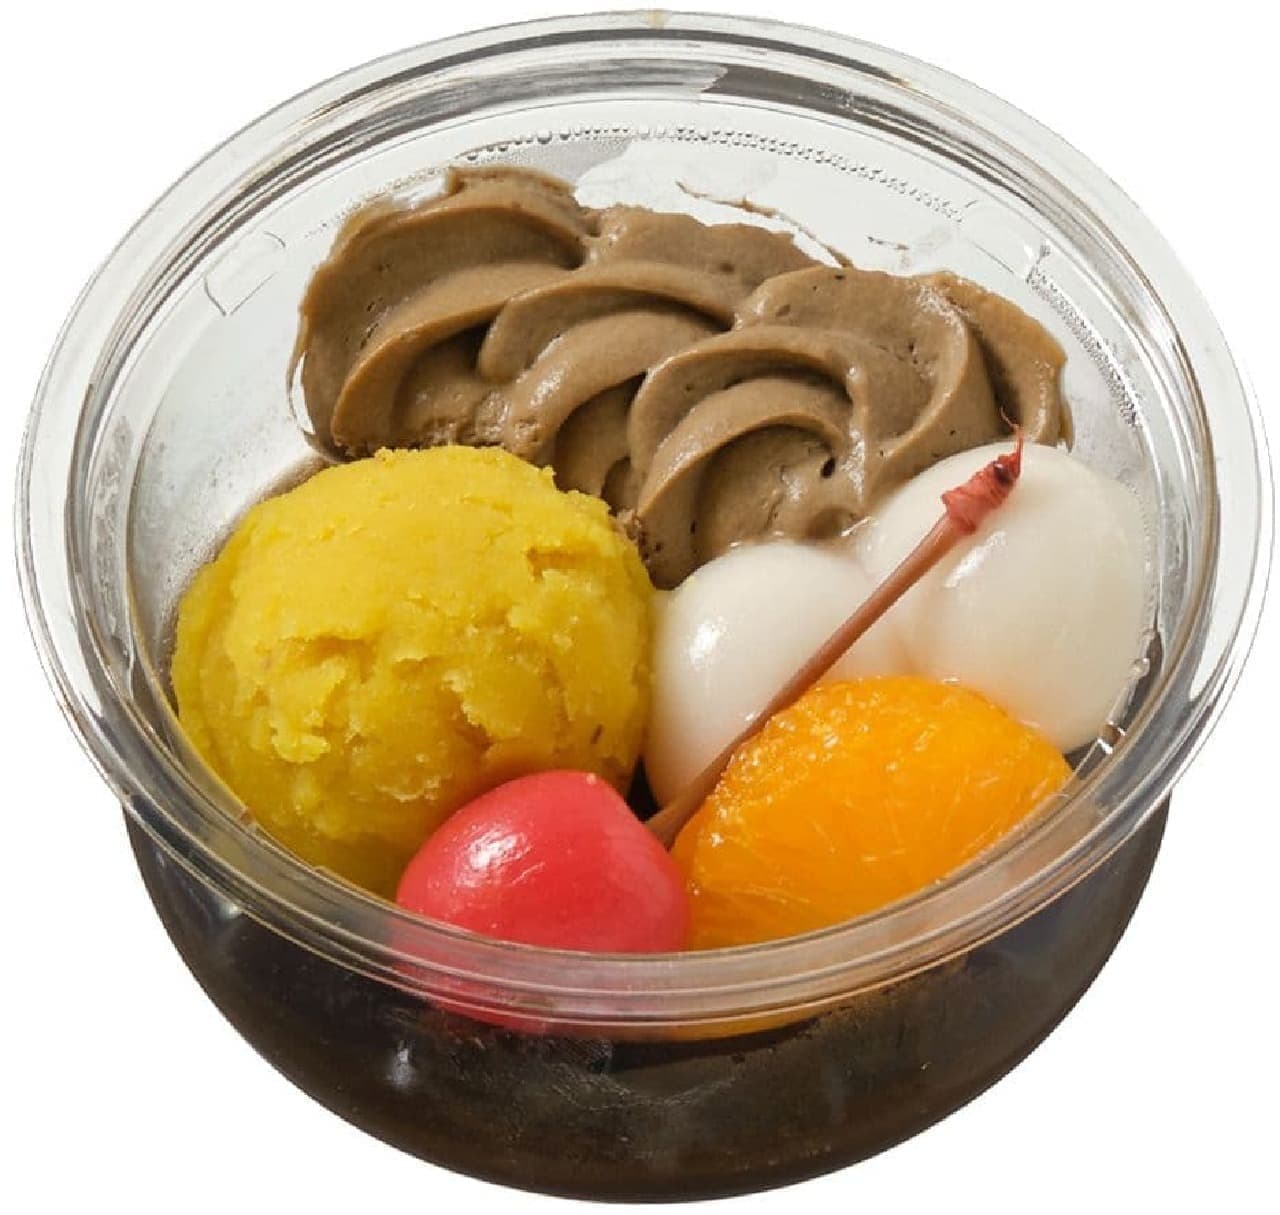 7-ELEVEN "Anmitsu with Houjicha and Imoan An (sweet potato bean paste) under the supervision of Kyuemon Ito